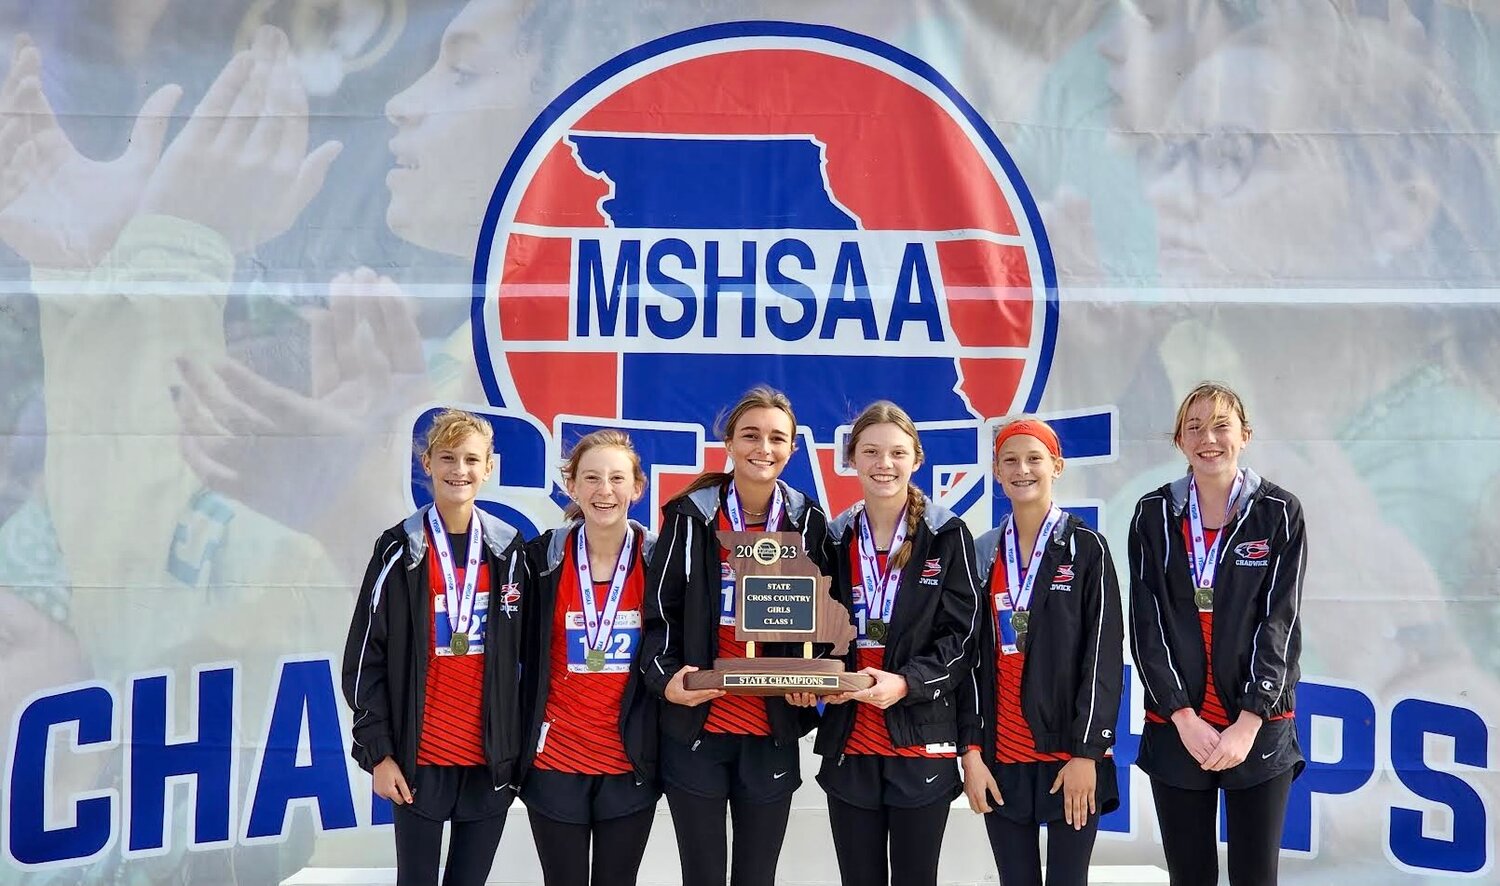 CHADWICK'S GIRLS CROSS COUNTRY TEAM (l-r) Emily Landry, Gretchen House, Lexi Loveland, Rae Little, Macy Landry and Maddy Sallee pose with their state championship trophy.